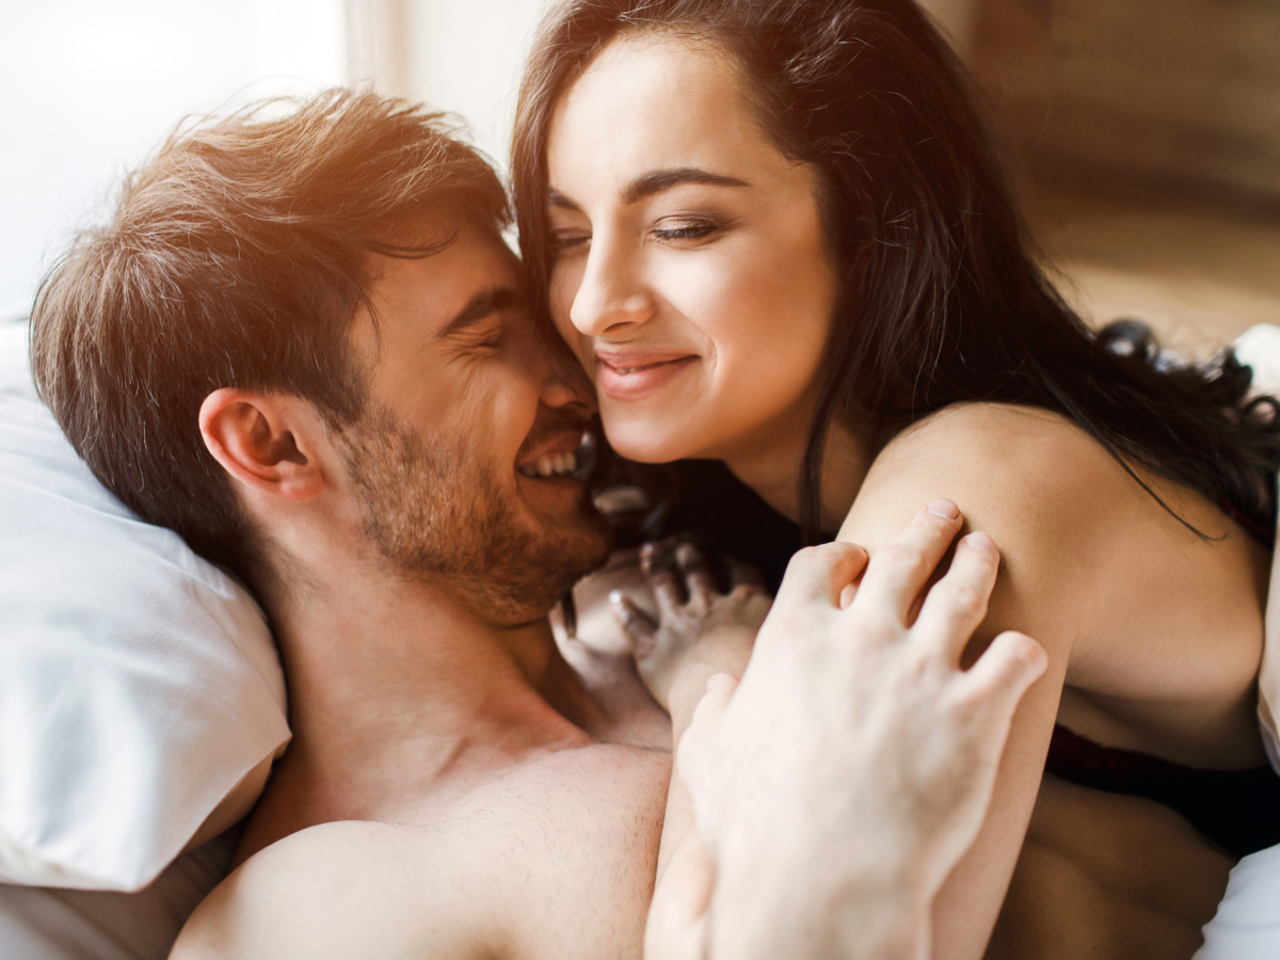 Study Couples have more sex when women initiate pic